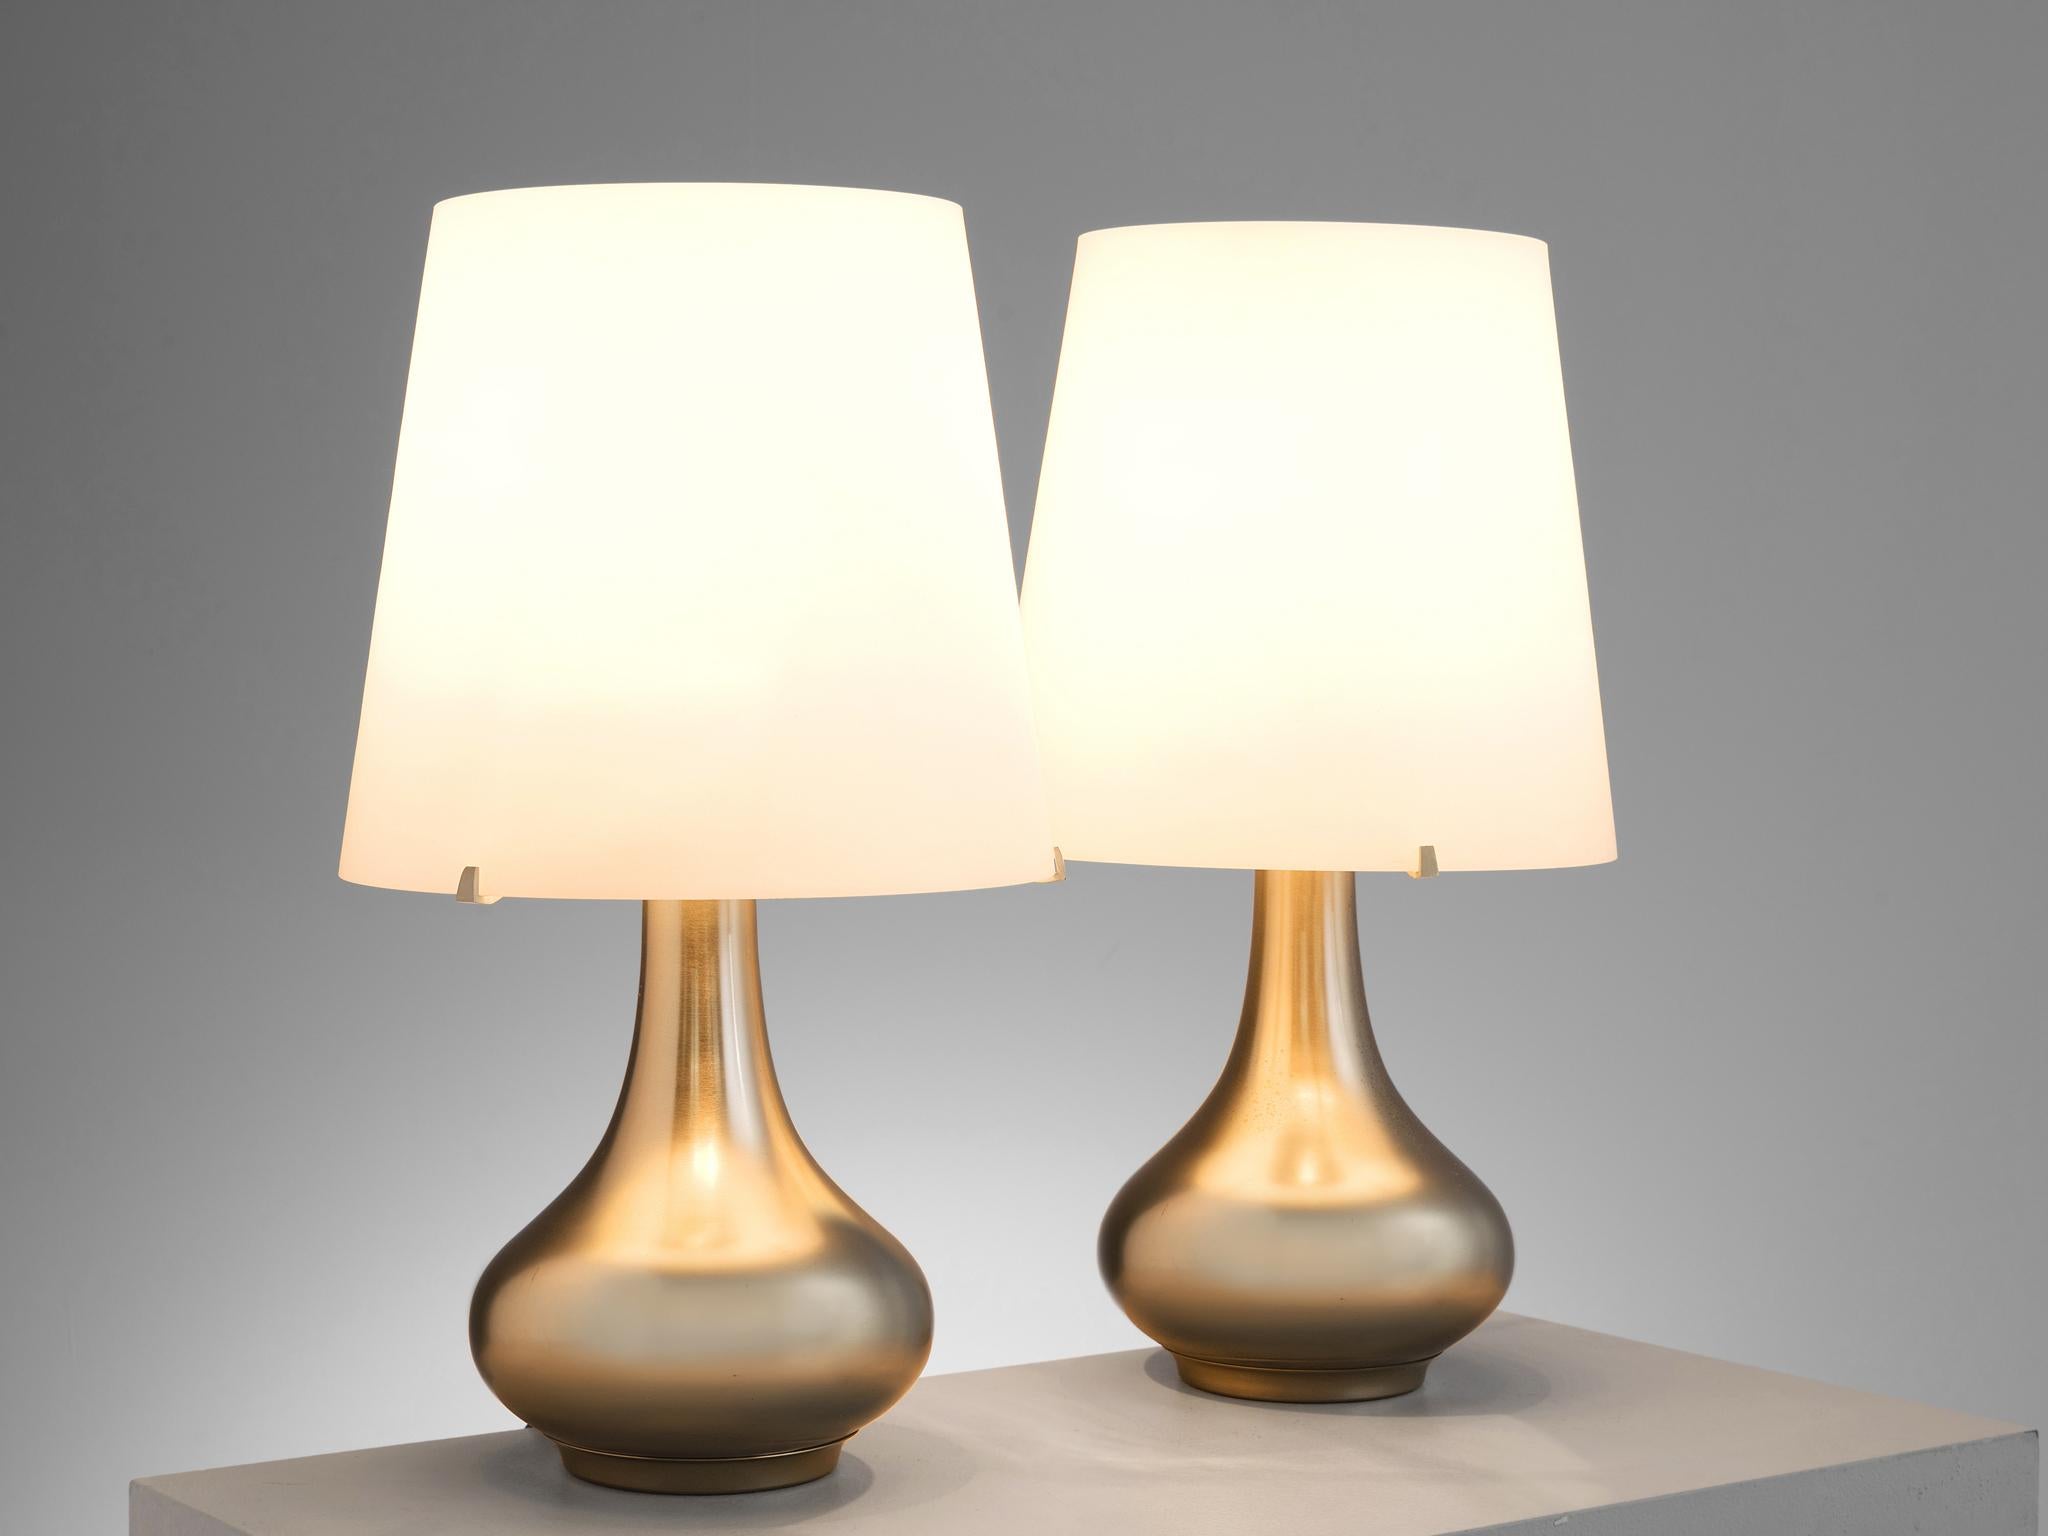 Max Ingrand for Fontana Arte table lamp, Model 2344, frosted glass, brushed nickel base, Italy, design 1964.

This pair of classic lamps is made out of frosted glass shades that are mounted on a brushed nickel base. The opaline shades complement